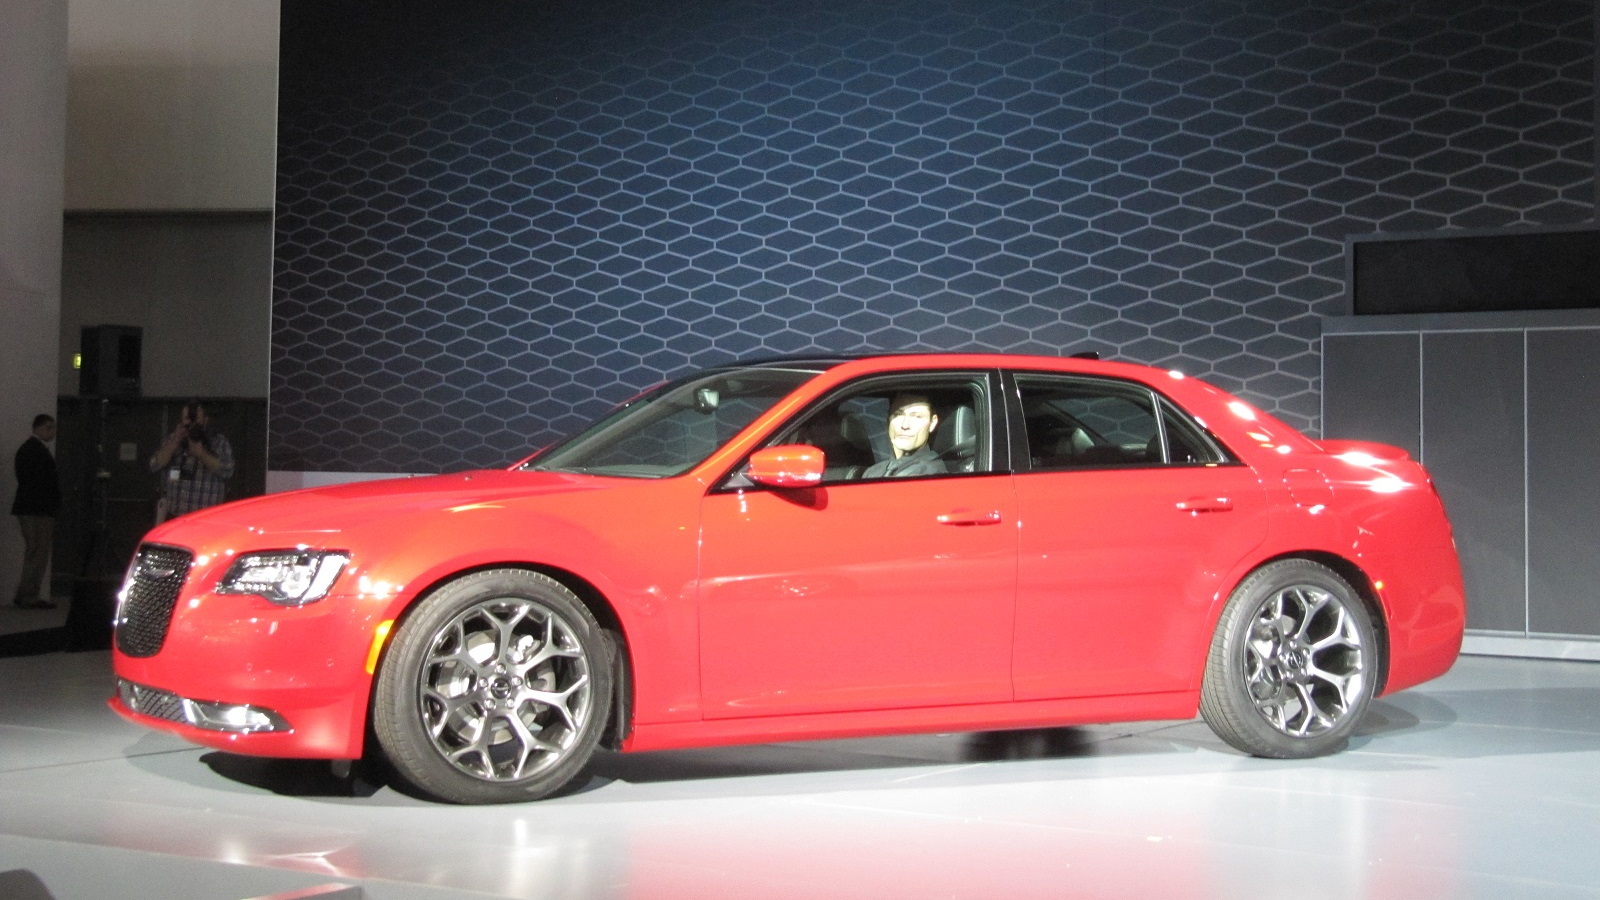 2015 Chrysler 300 unveiled at 2014 Los Angeles Auto Show